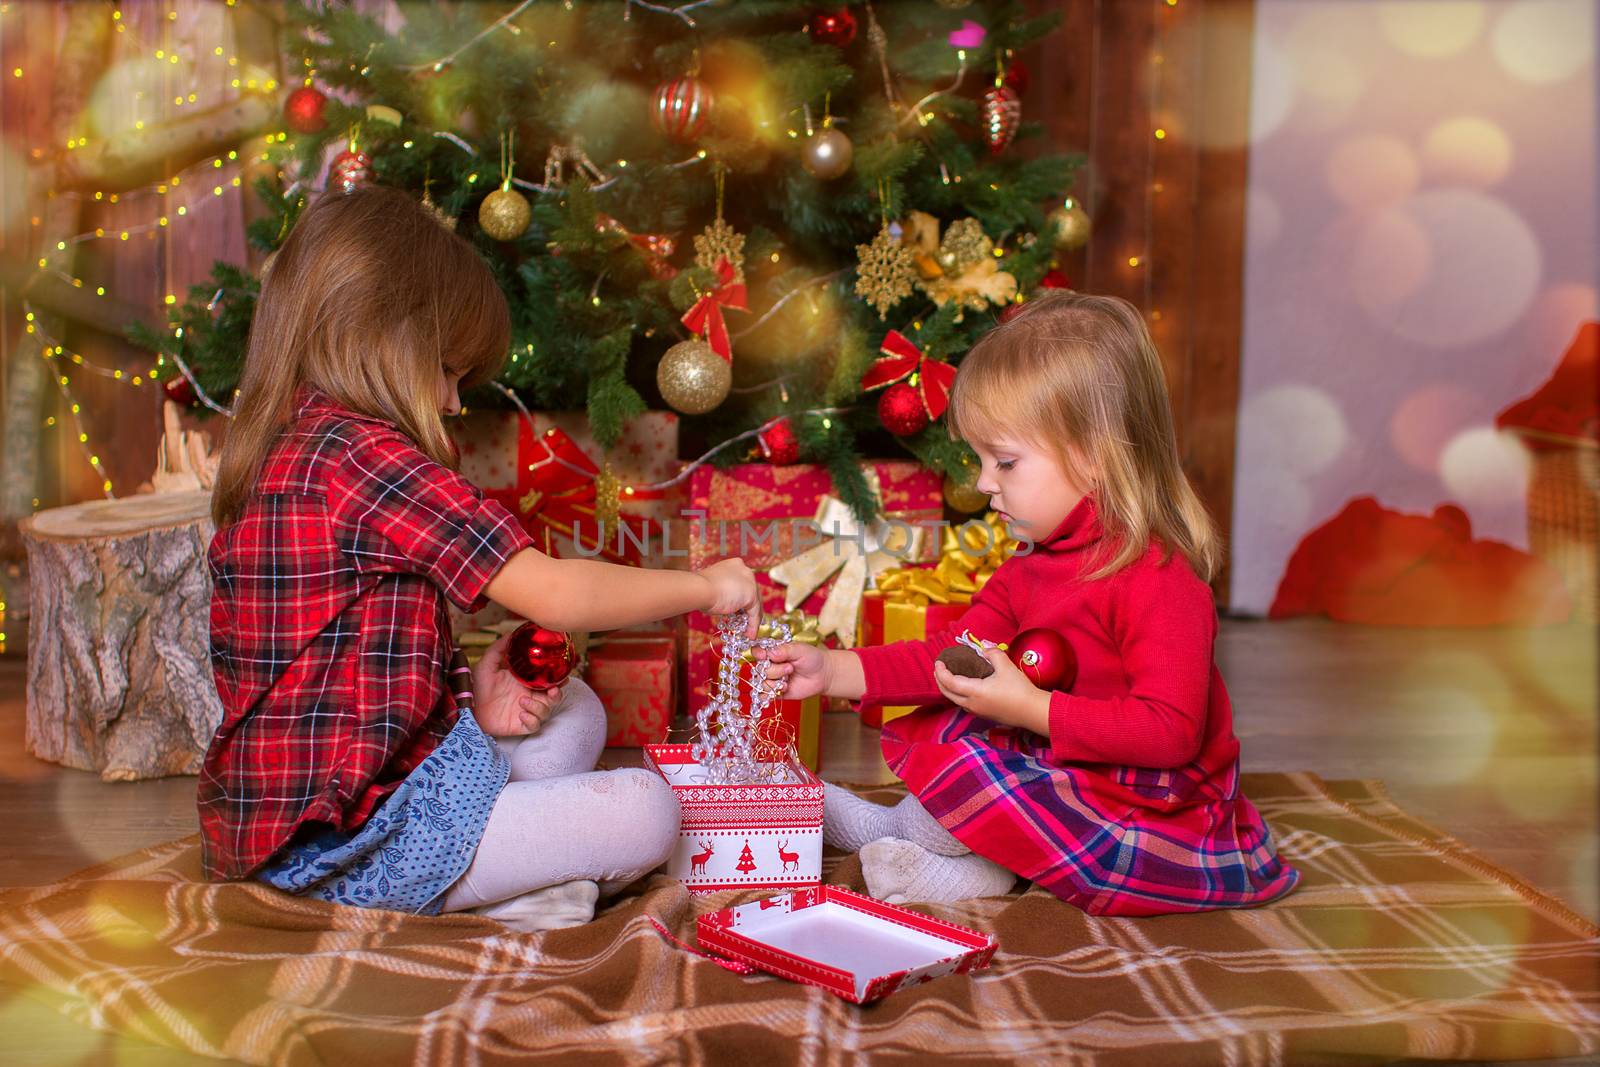 Girls of the sister sort gifts under a Christmas tree in a photographic studio